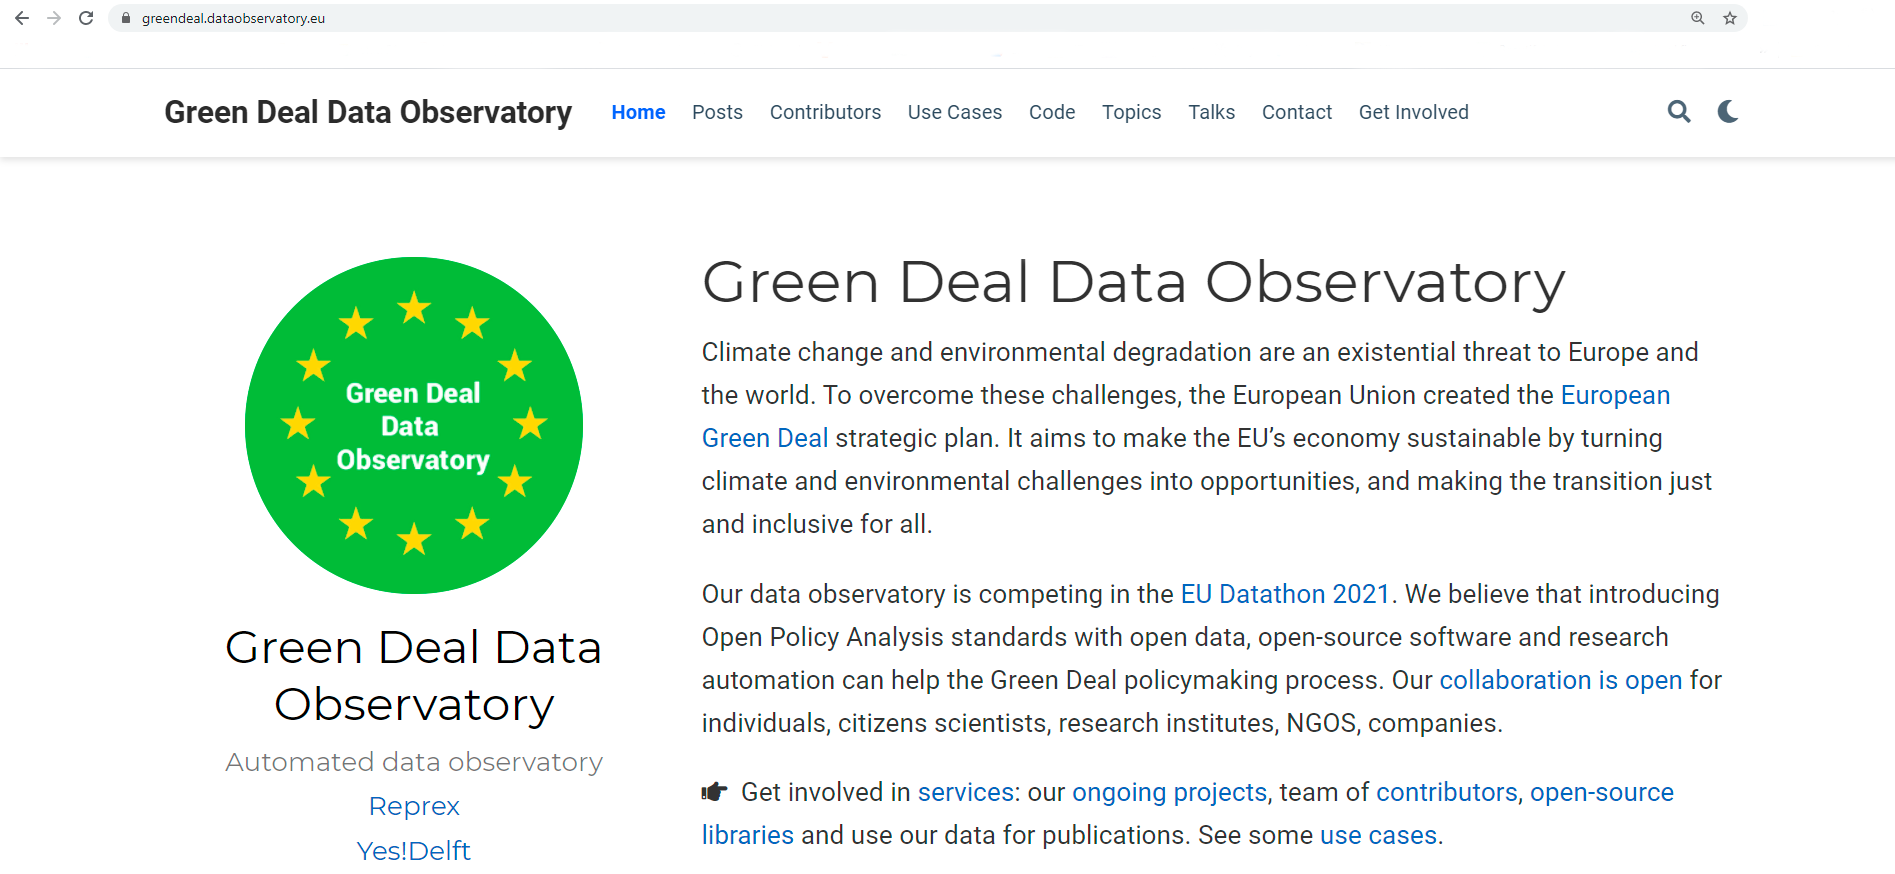 Our Green Deal Data Observatory connects socio-economic and environmental data to help understanding and combating climate change.